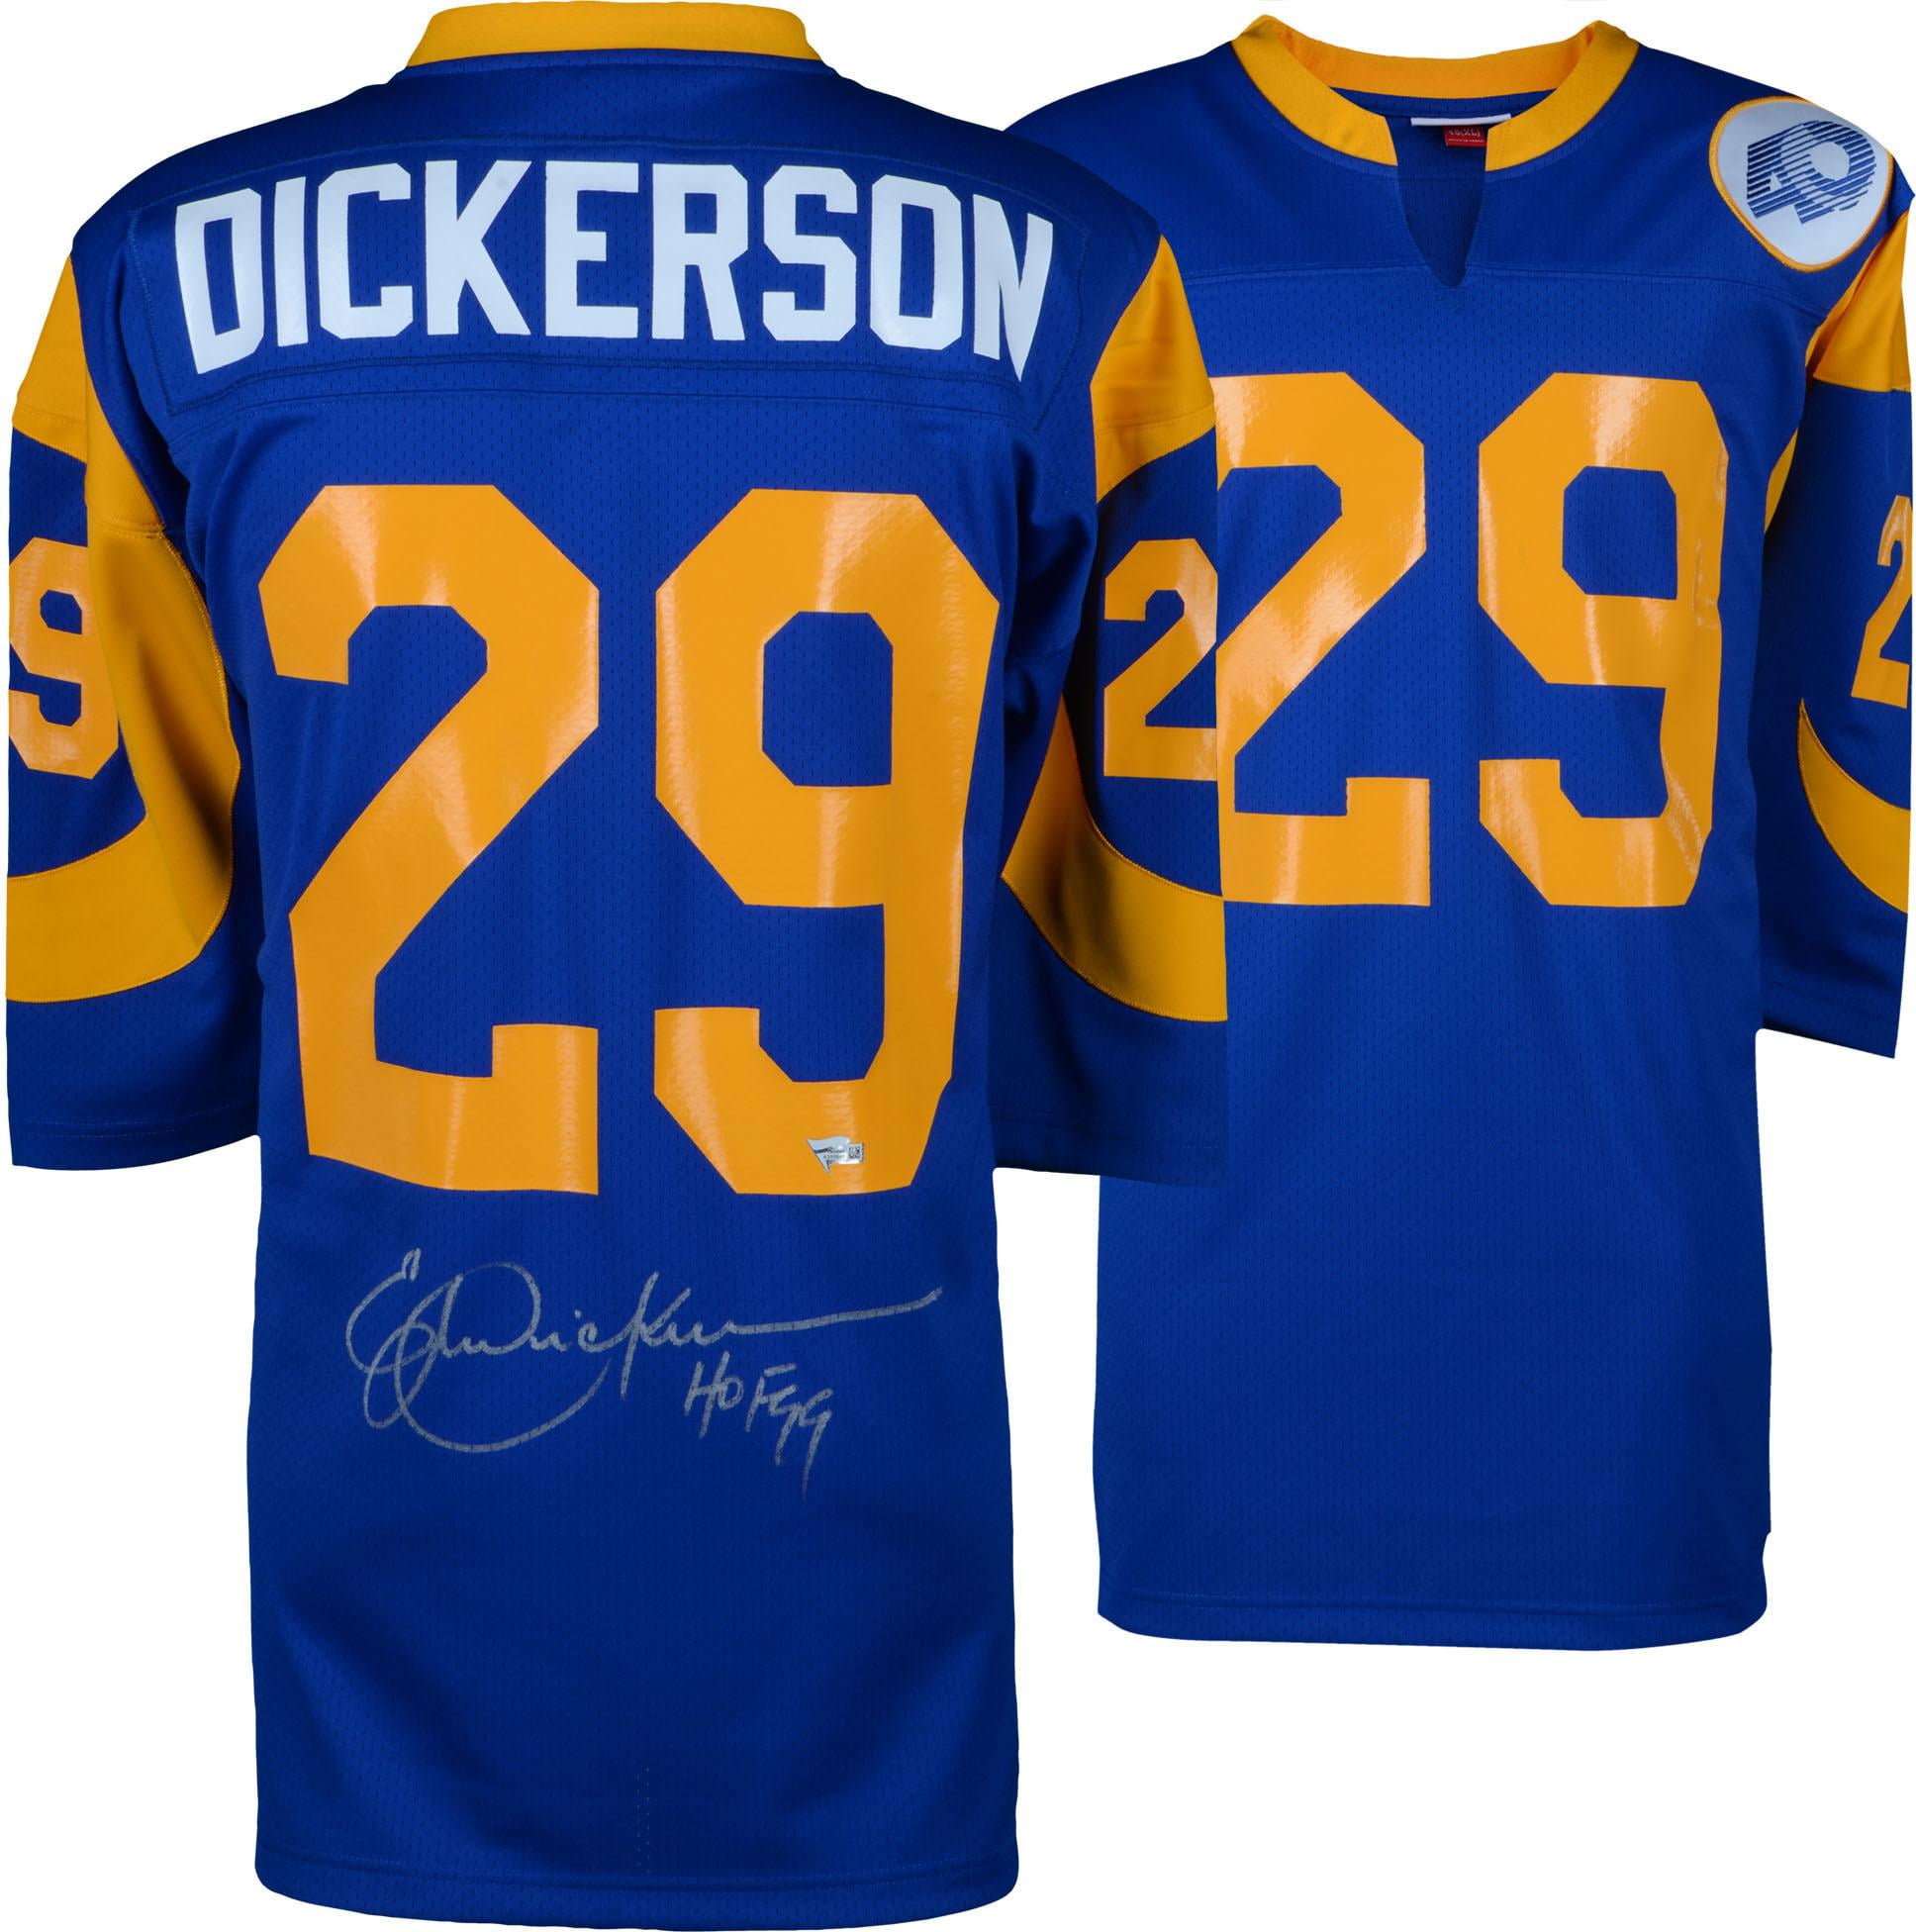 Eric Dickerson Los Angeles Rams Autographed 16 x 20 White Running Photograph withHOF 99 Inscription Fanatics Authentic Certified